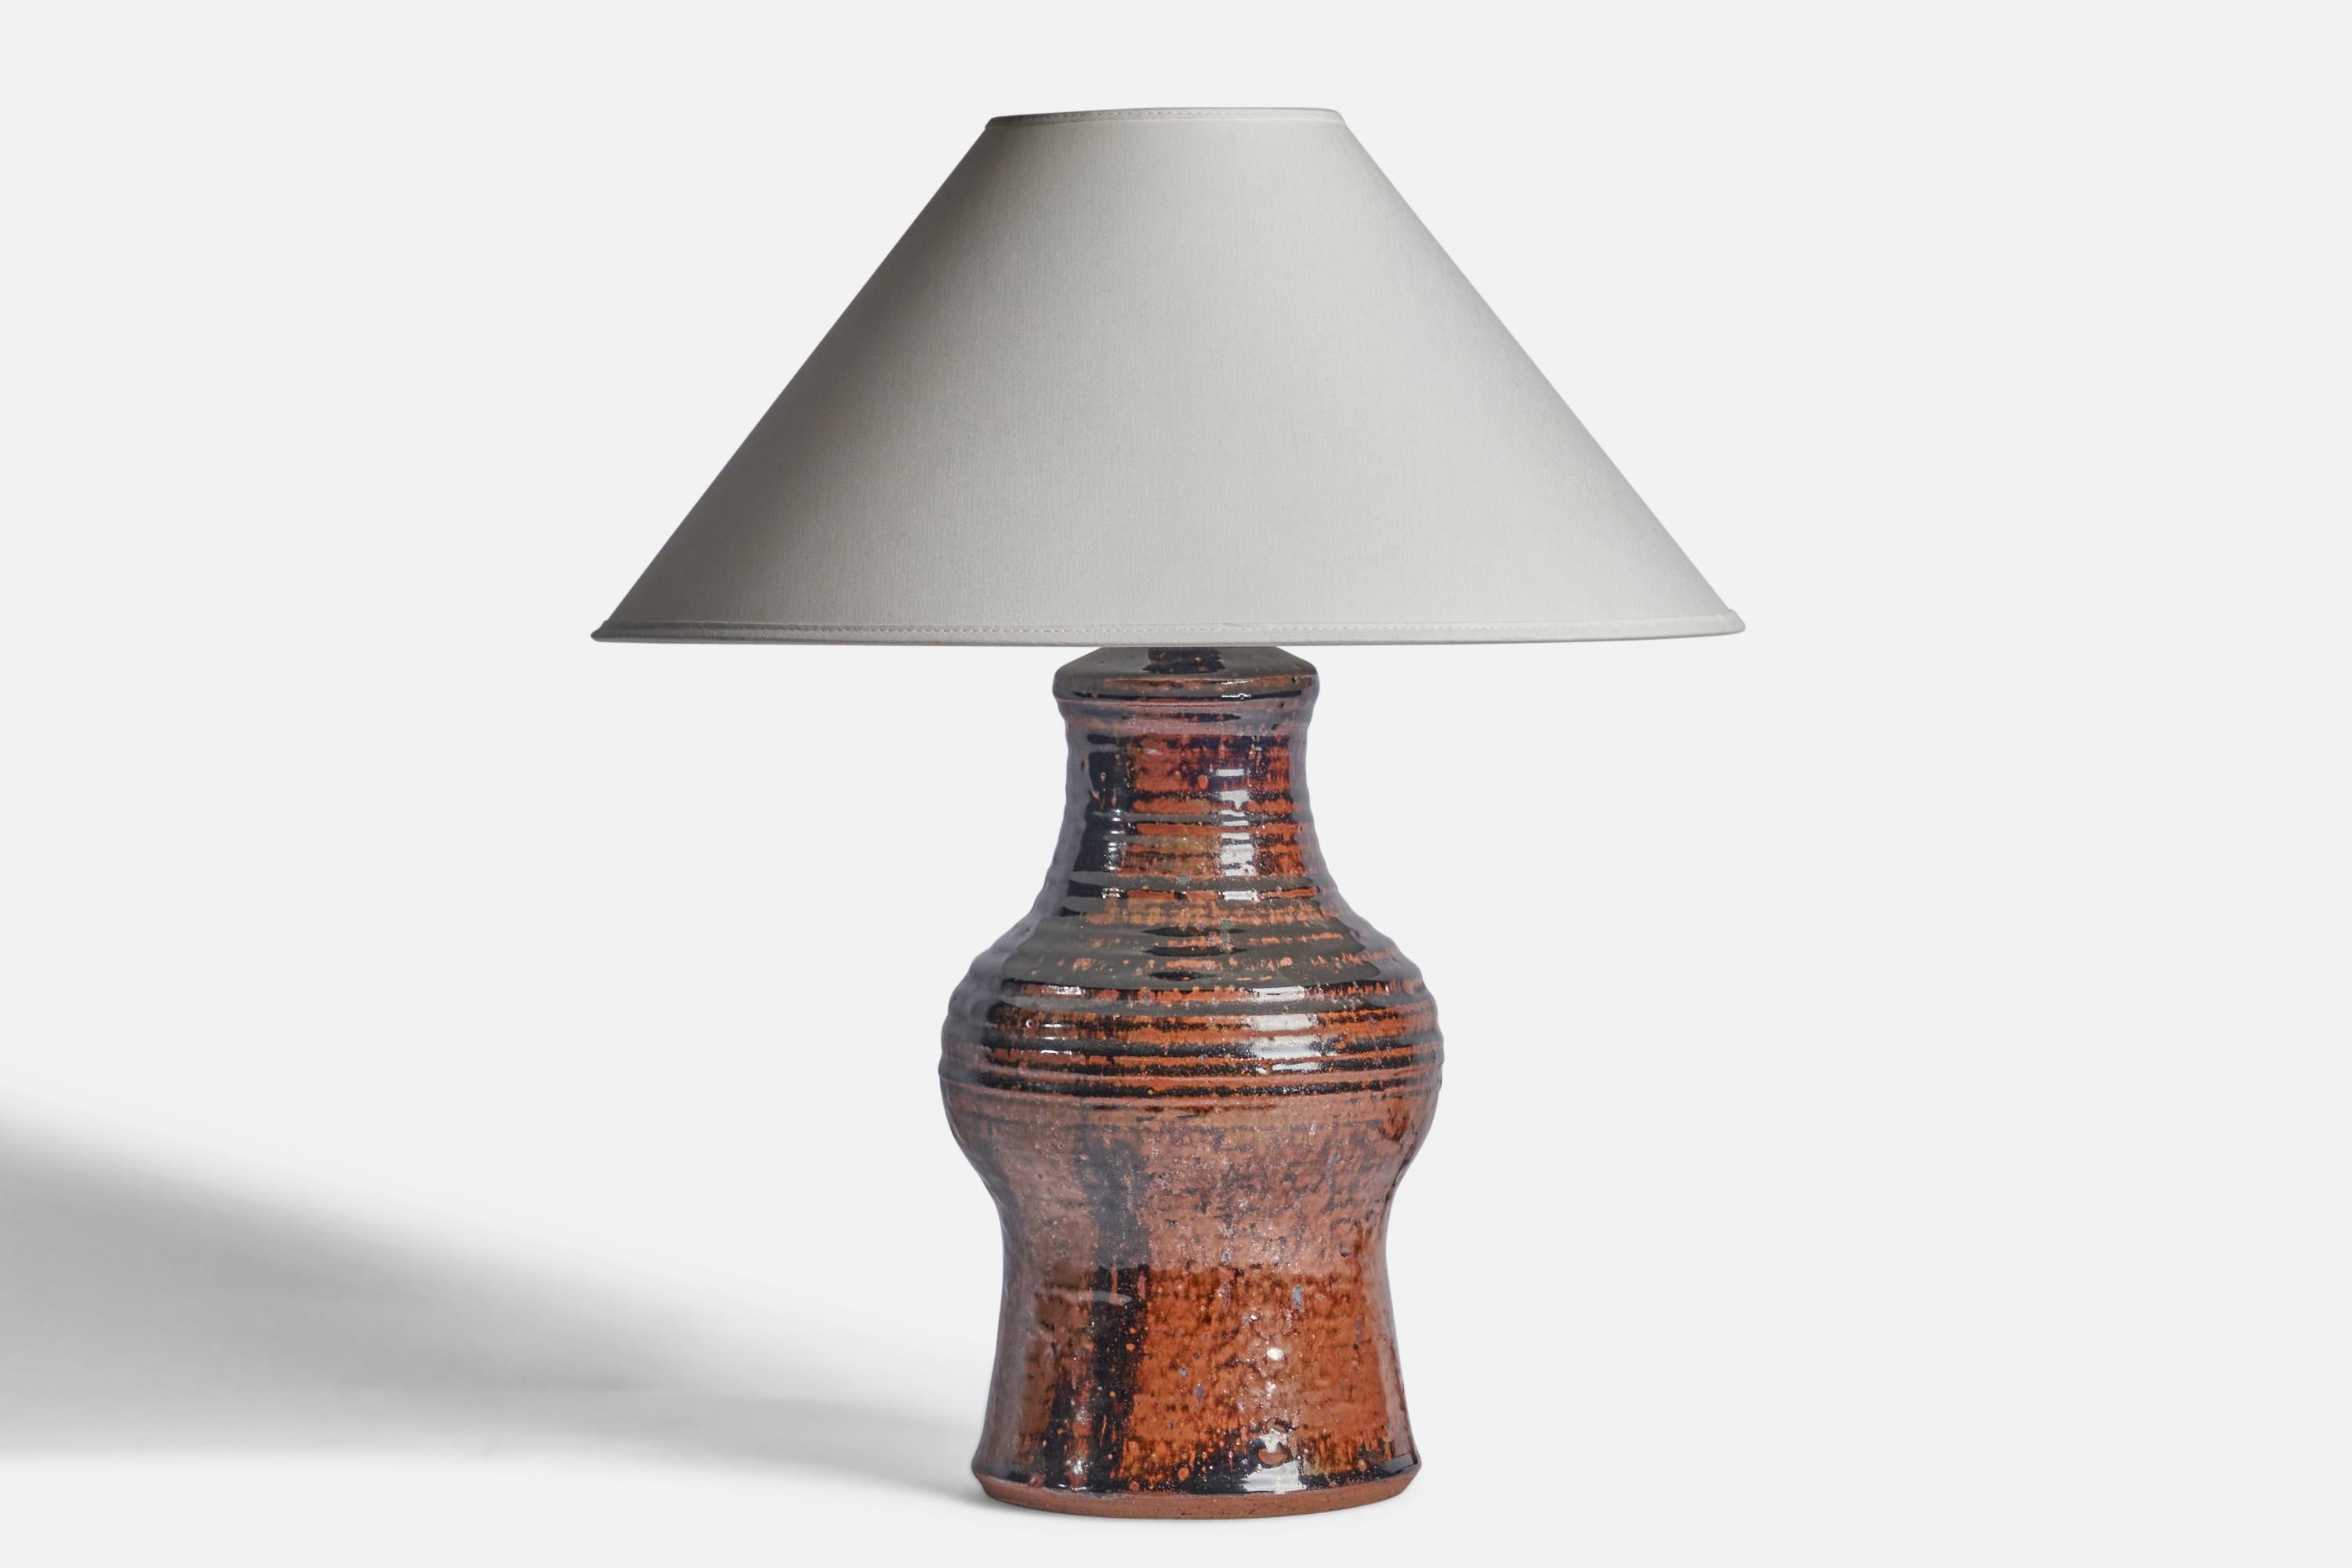 A brown and black-glazed stoneware table lamp designed and produced in Denmark, c. 1950s.

Dimensions of Lamp (inches): 14.5 H x 6.5” Diameter
Dimensions of Shade (inches): 4.5” Top Diameter x 16” Bottom Diameter x 7.25” H
Dimensions of Lamp with